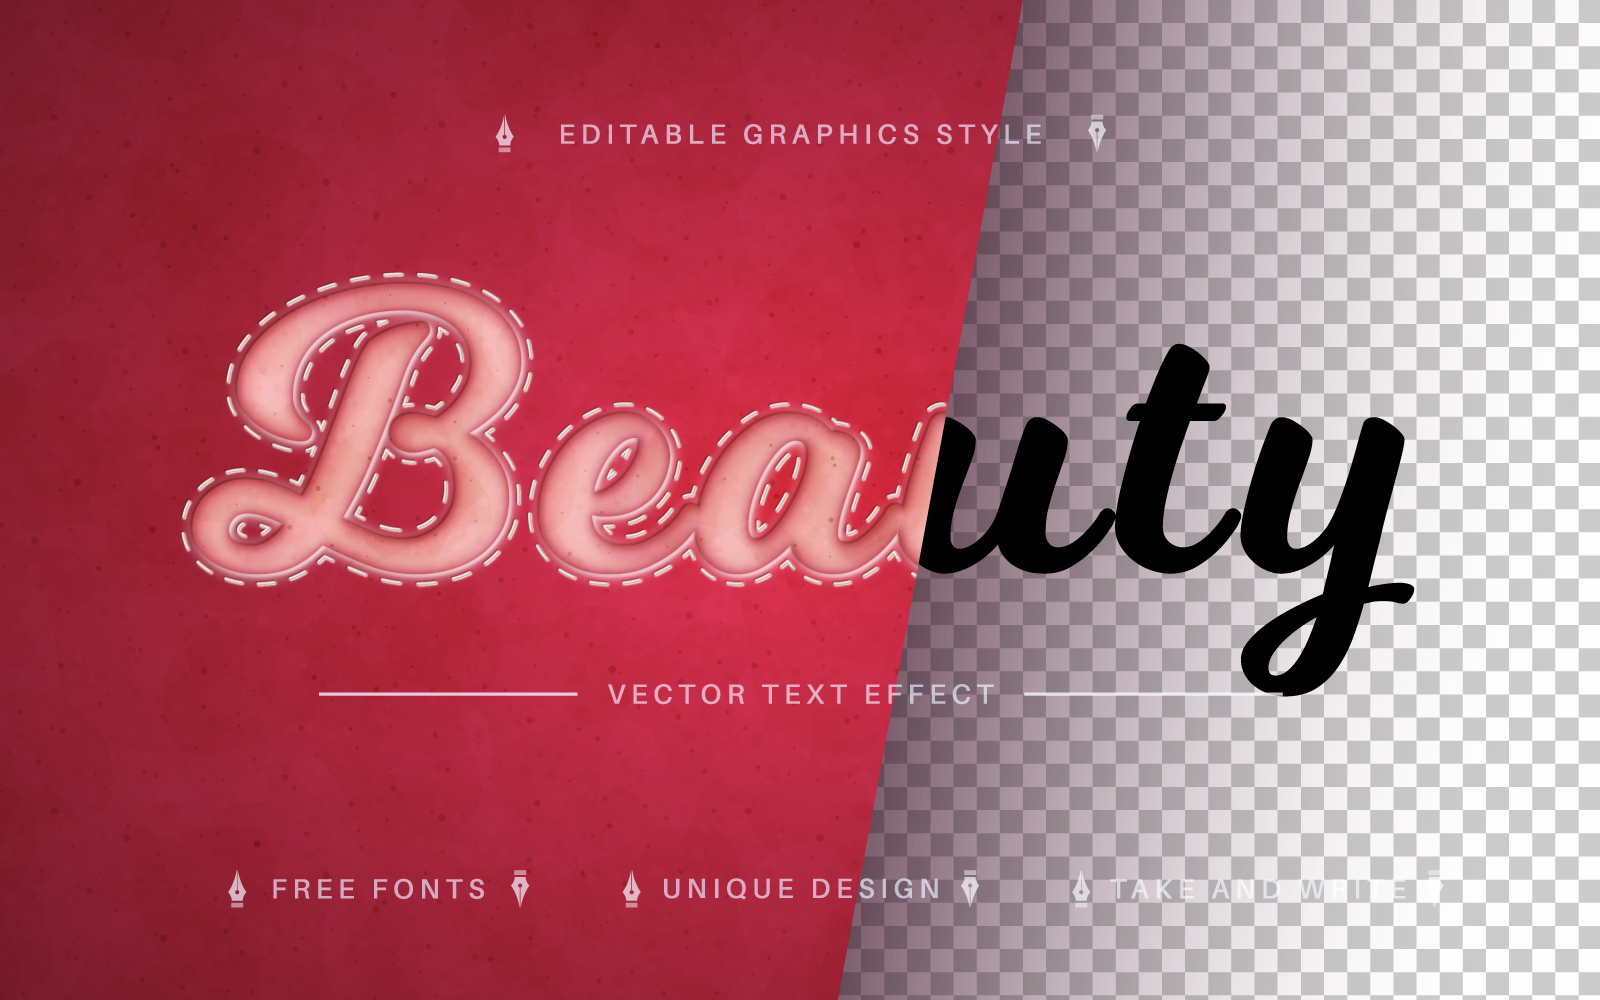 Beauty - Editable Text Effect, Font Style, Graphic Illustration